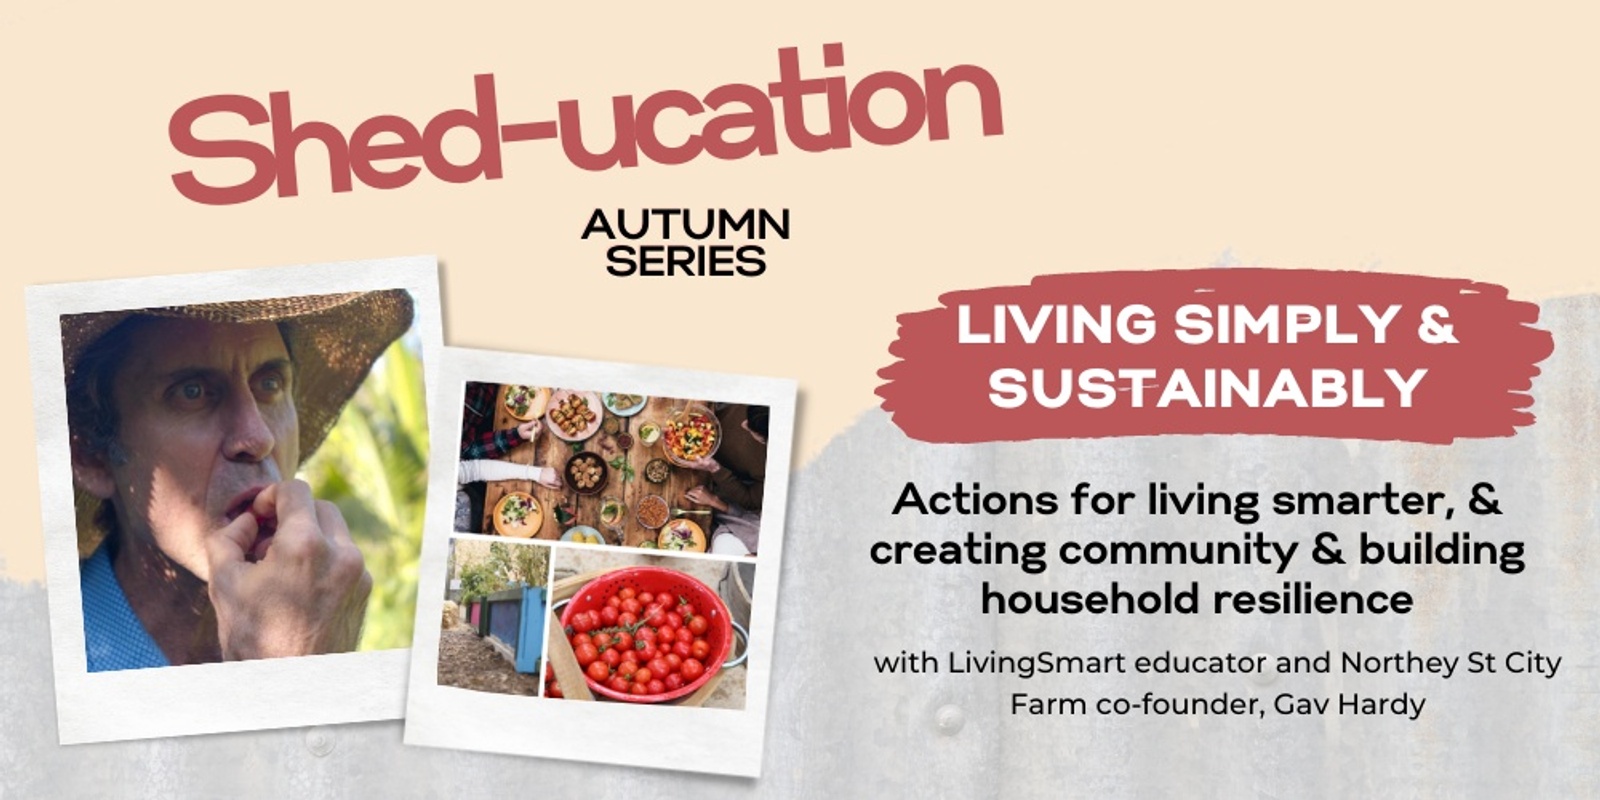 Banner image for Living simply & sustainably | Shed-ucation Autumn Series